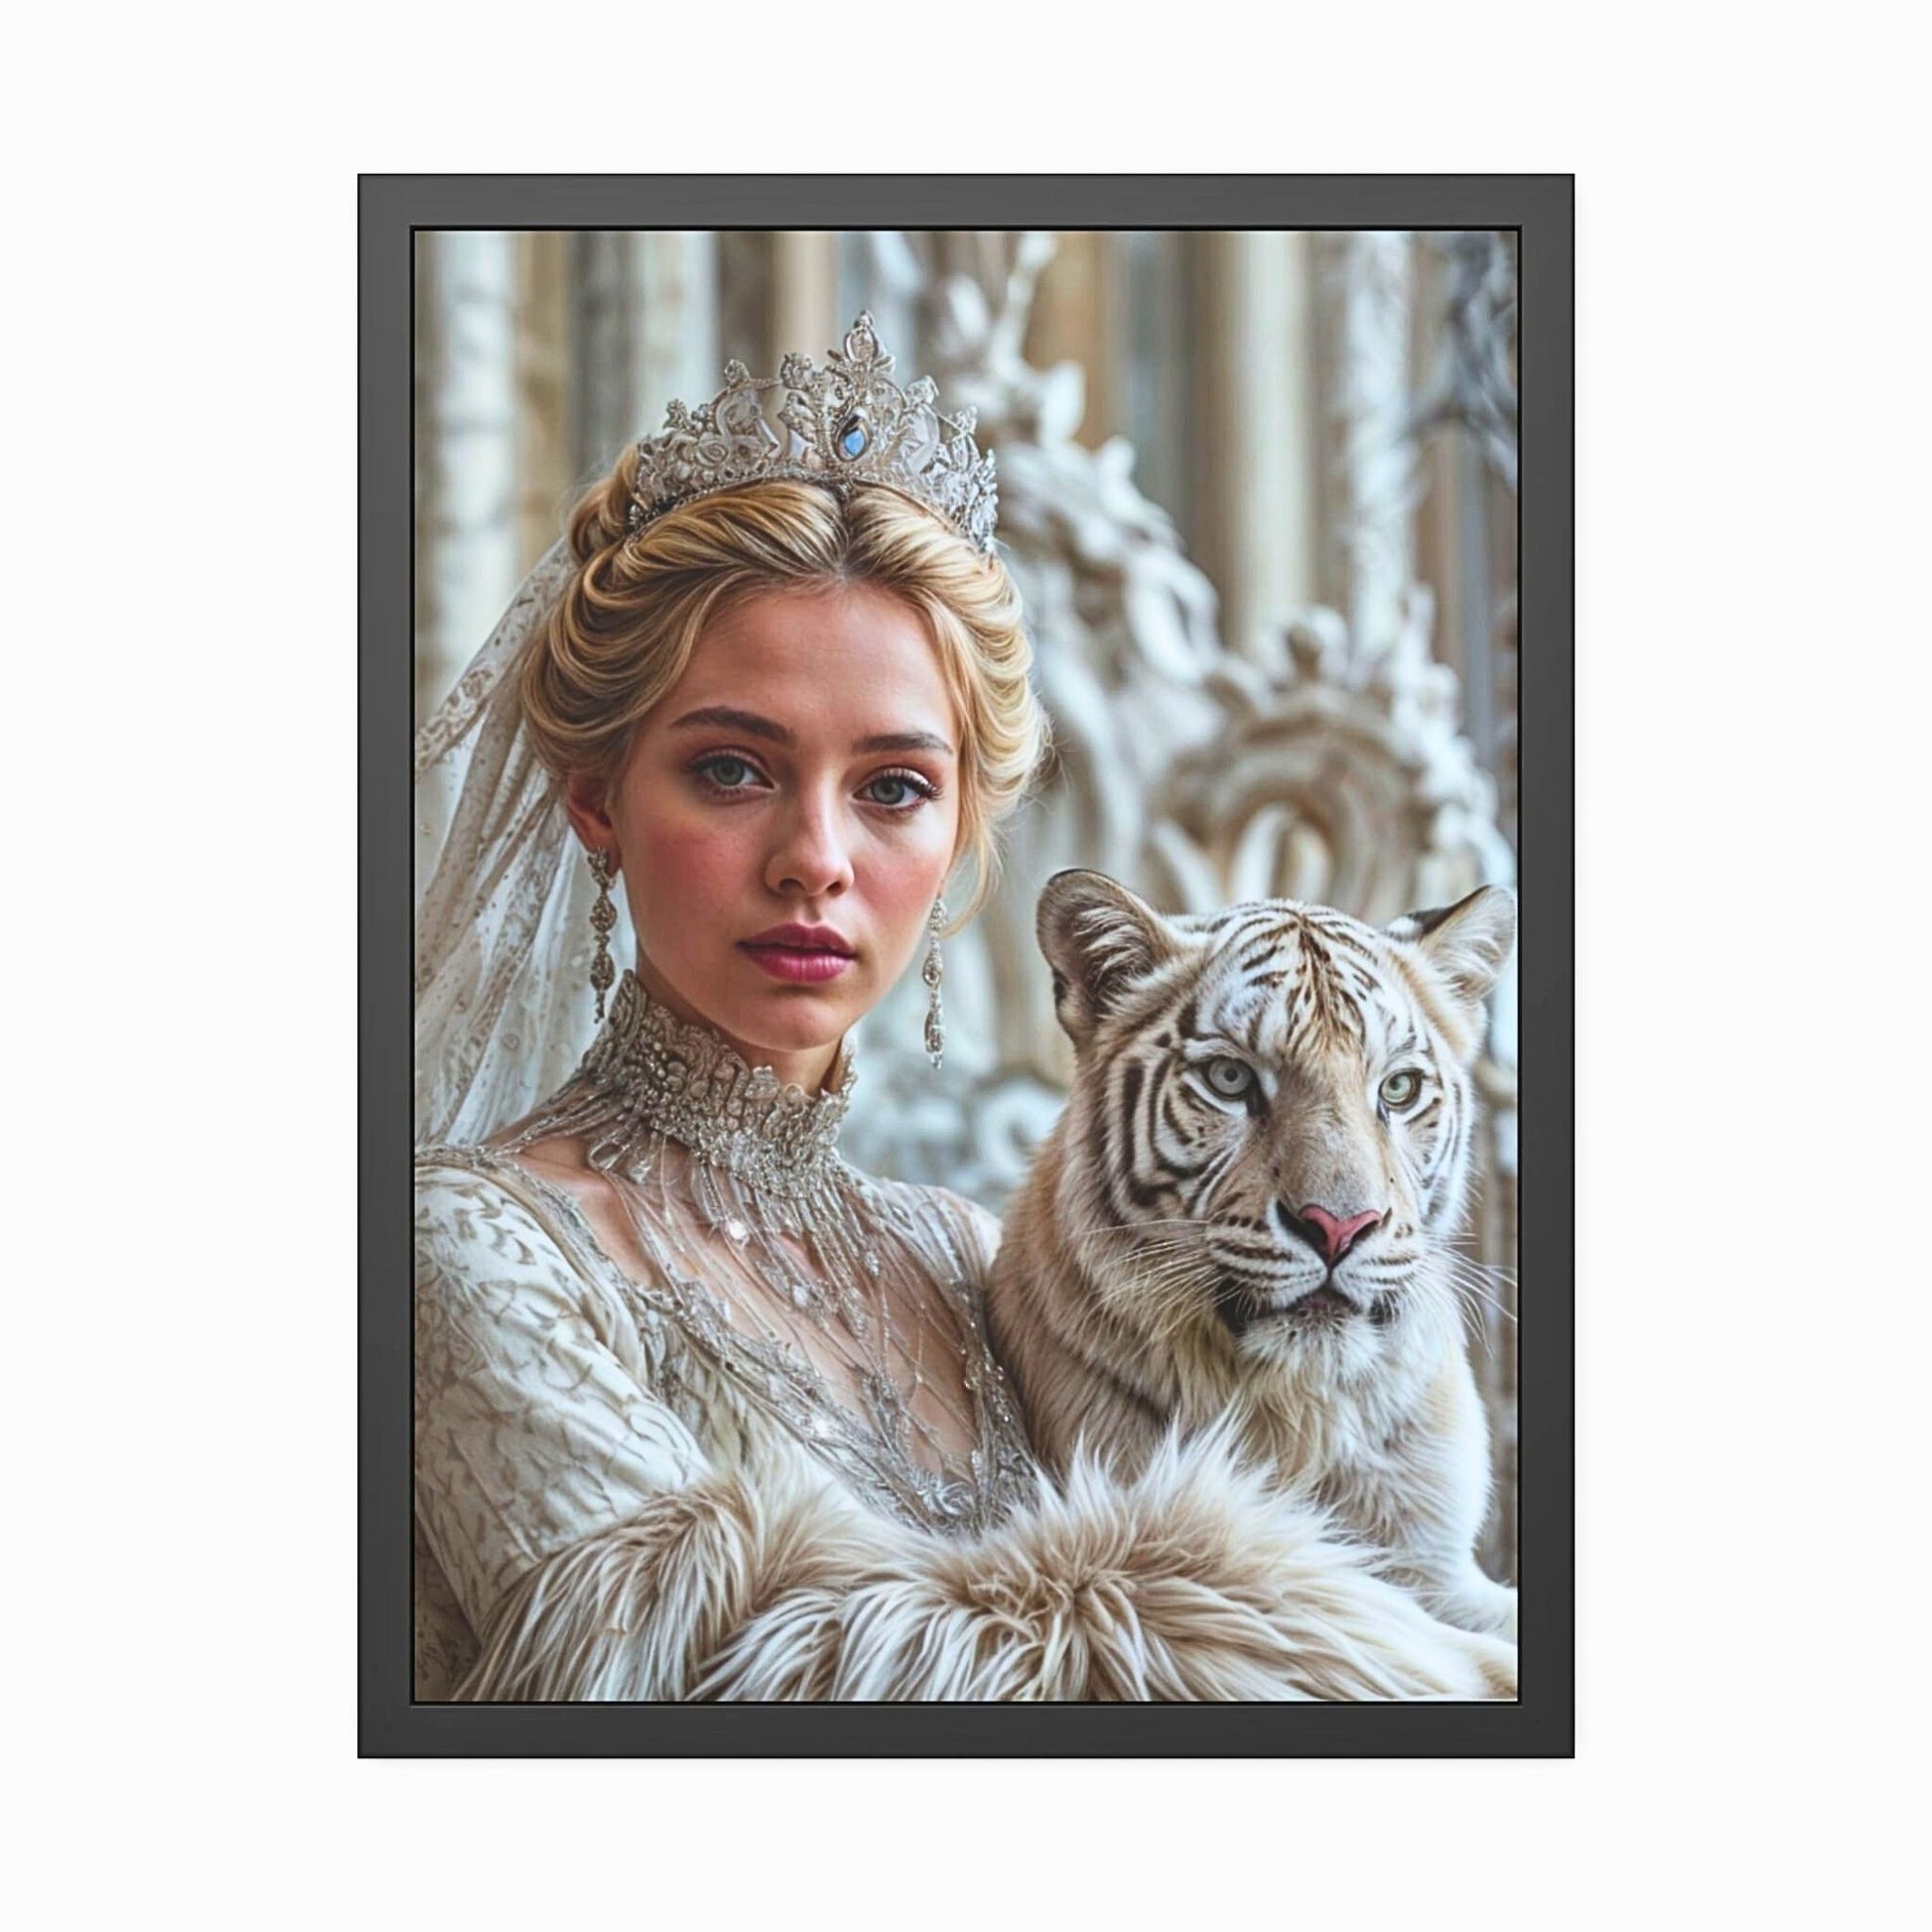 Turn her into royalty with a personalized queen portrait inspired by Renaissance art. This custom creation from your photo makes a unique and heartfelt birthday gift, blending historical charm with modern elegance. Perfect for honoring the special women in your life with a timeless piece of art.